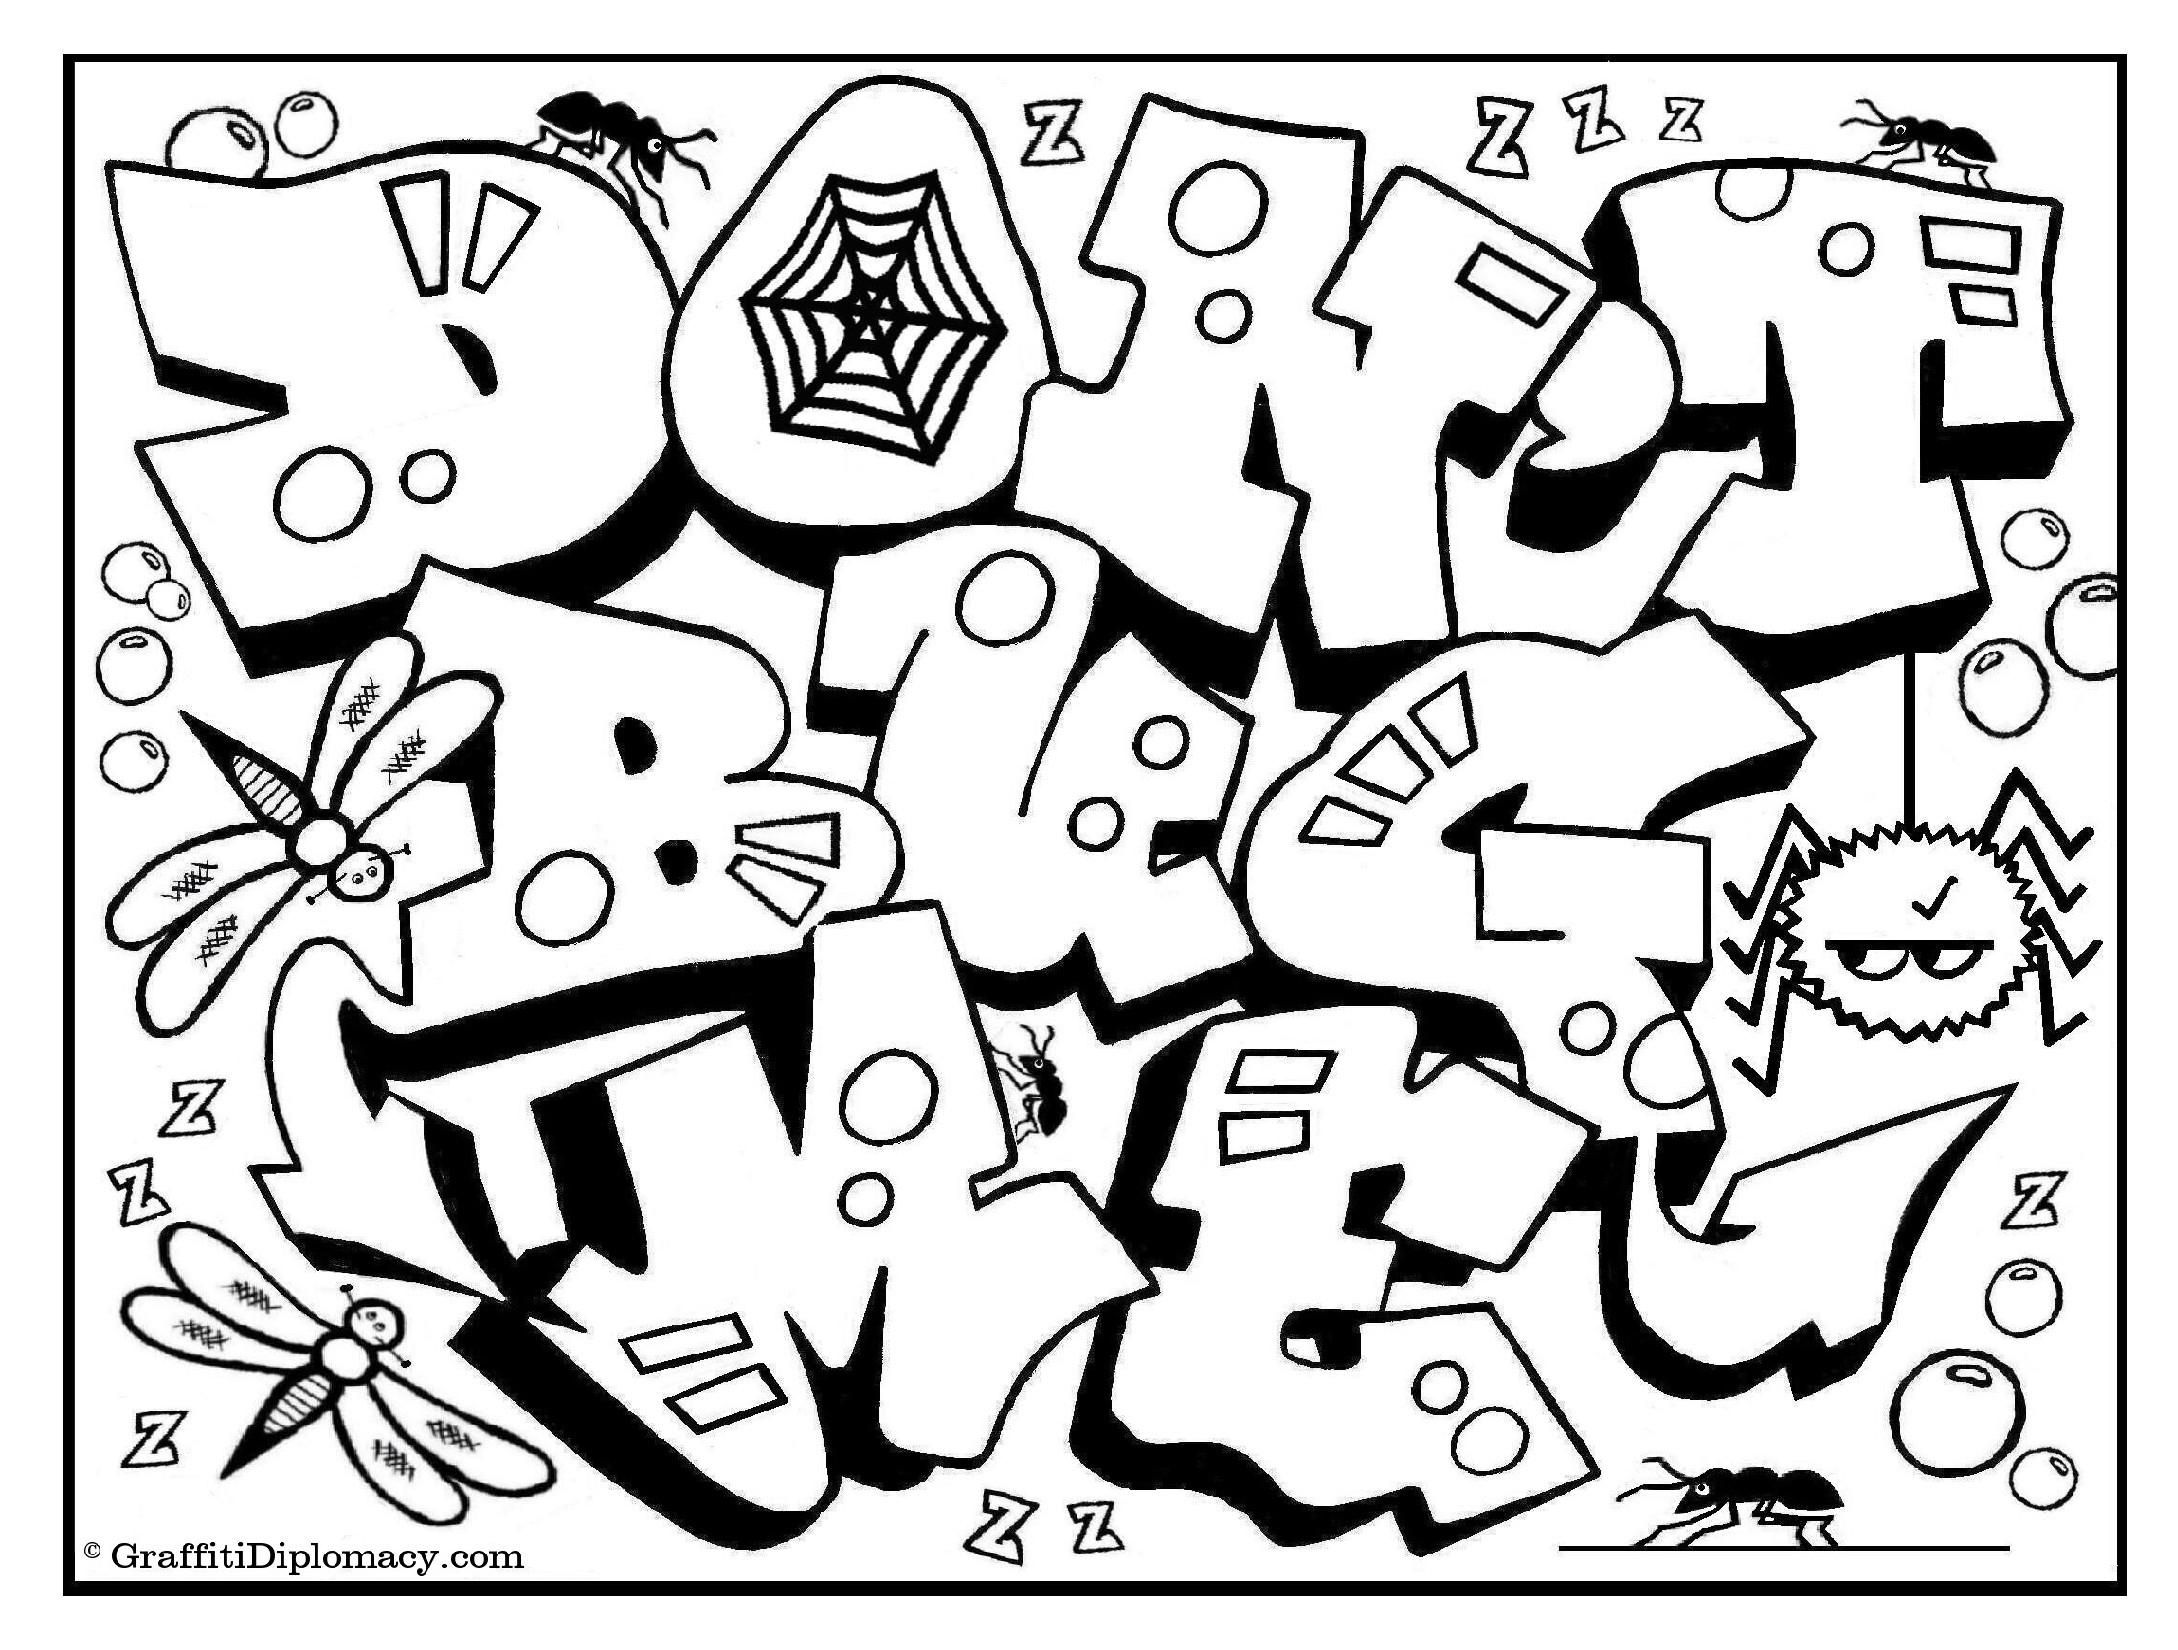 Graffiti Art Coloring Pages At GetColorings Free Printable Colorings Pages To Print And Color